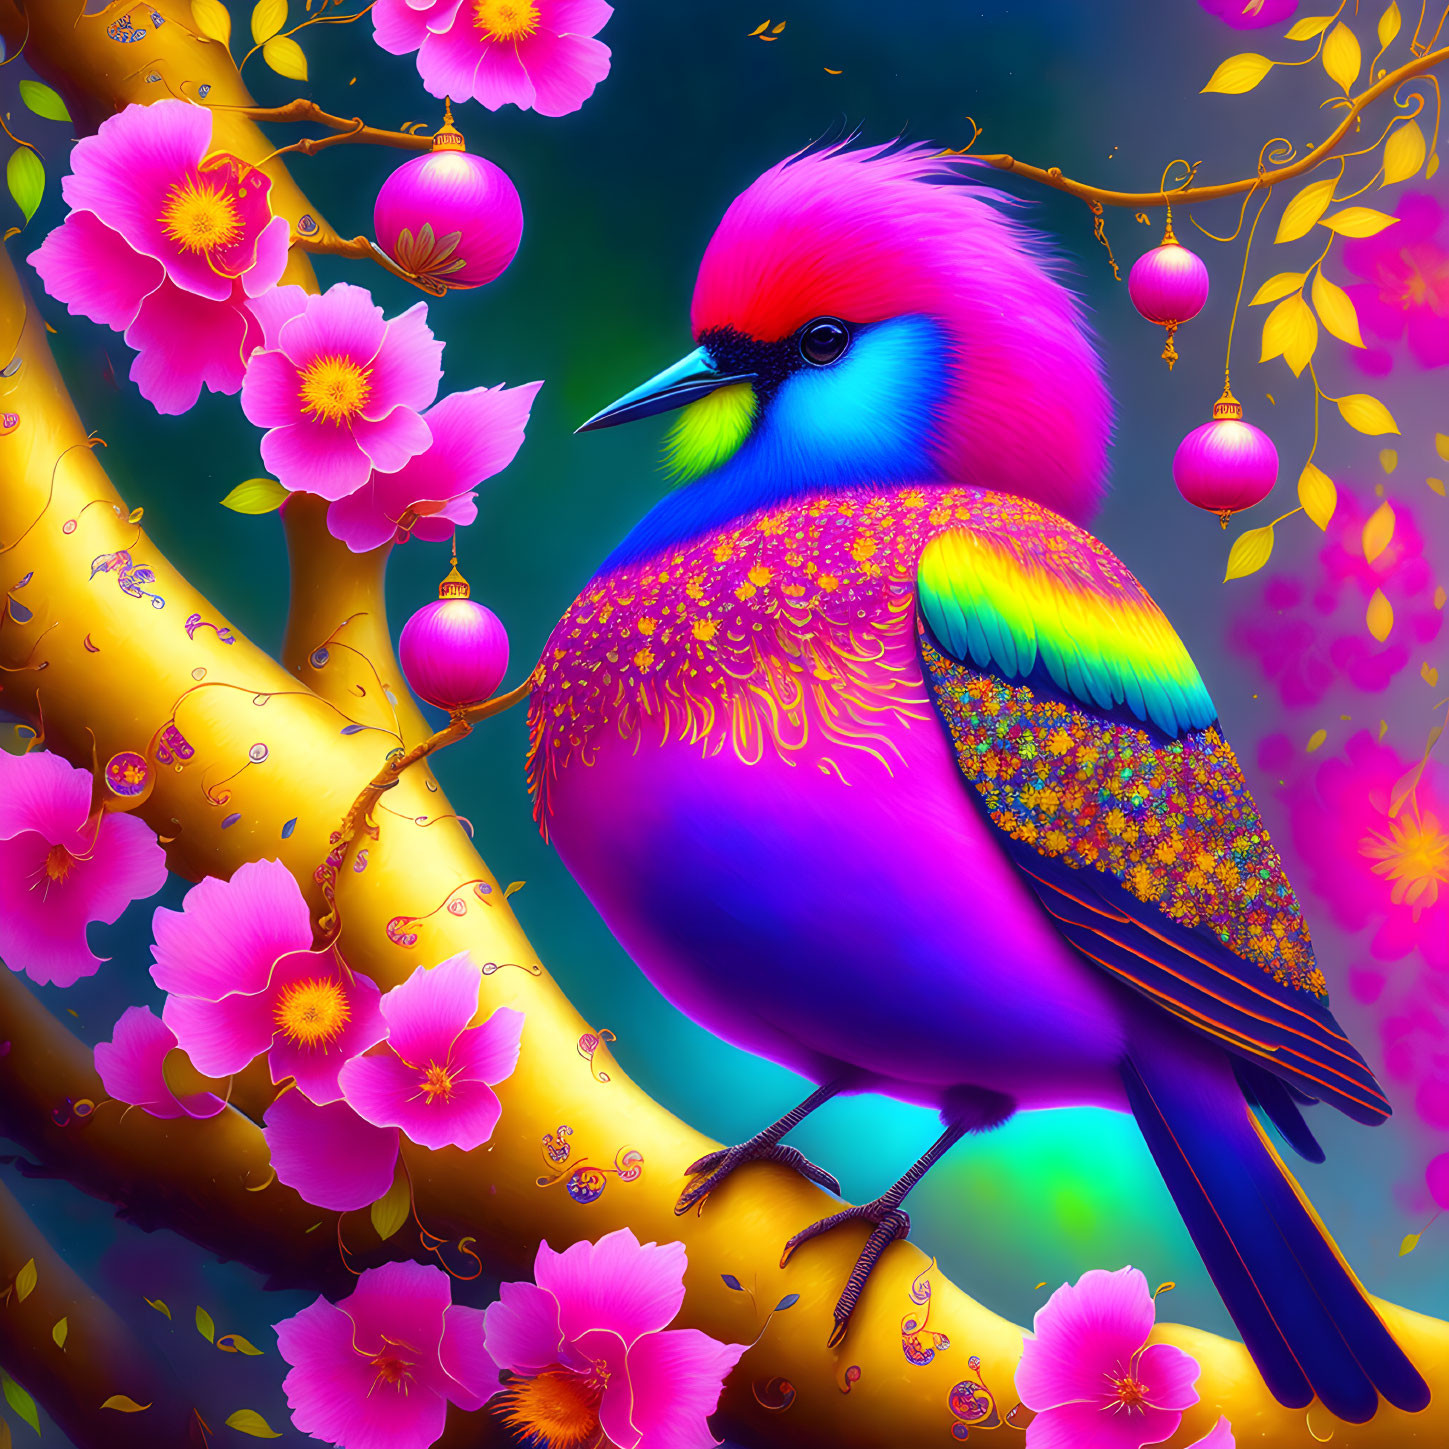 Colorful Stylized Bird Illustration with Purple, Blue, and Gold Hues